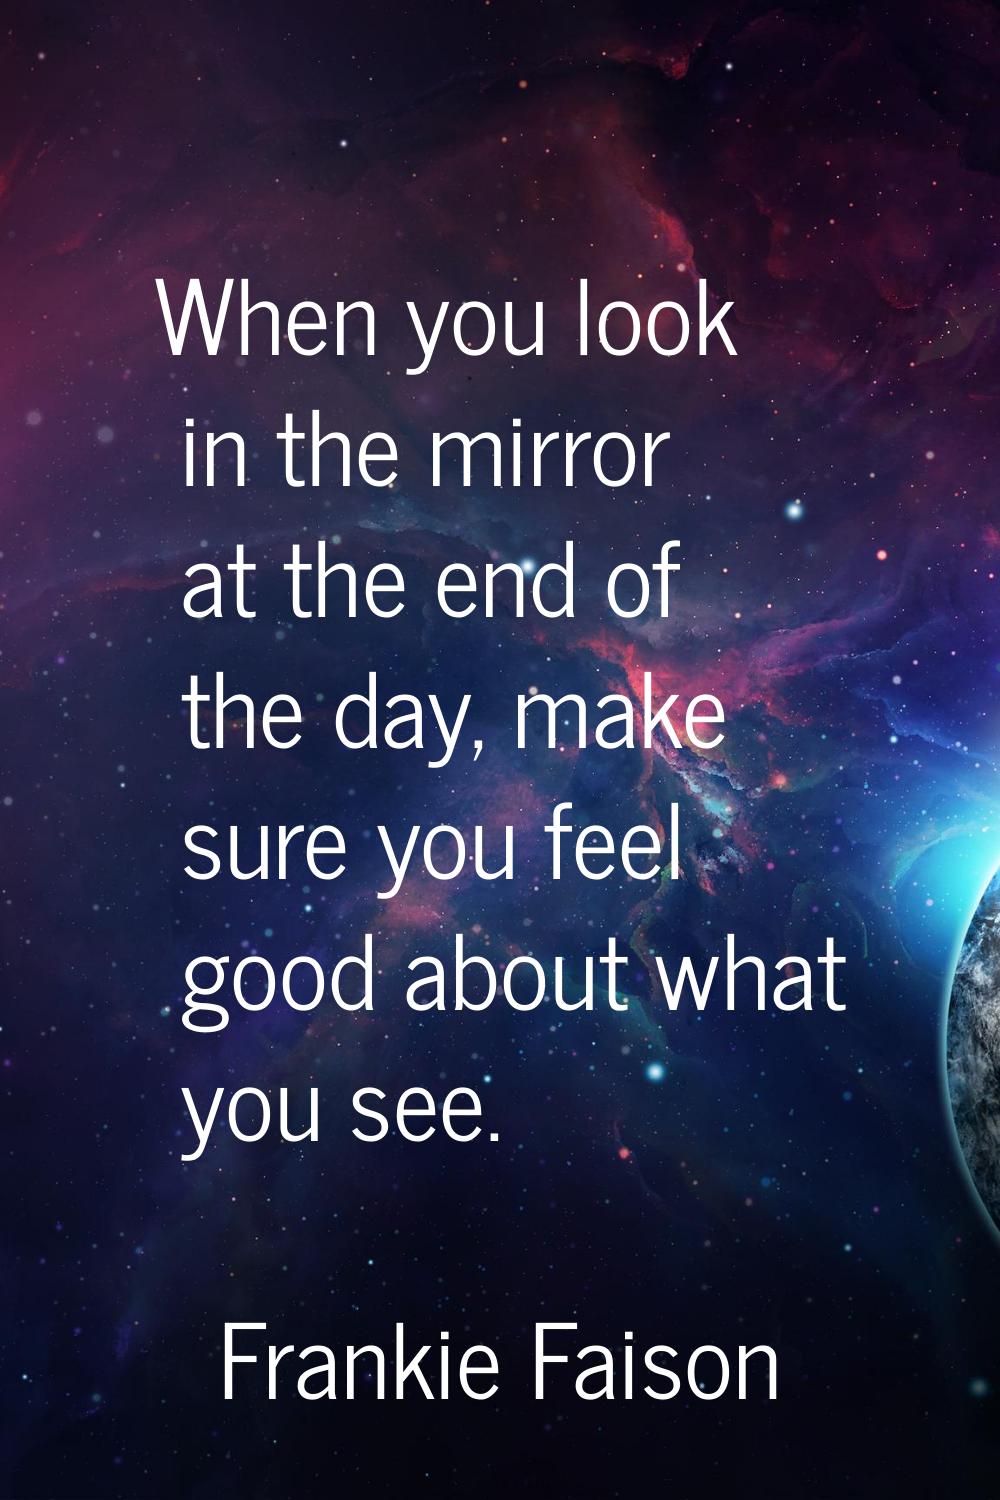 When you look in the mirror at the end of the day, make sure you feel good about what you see.